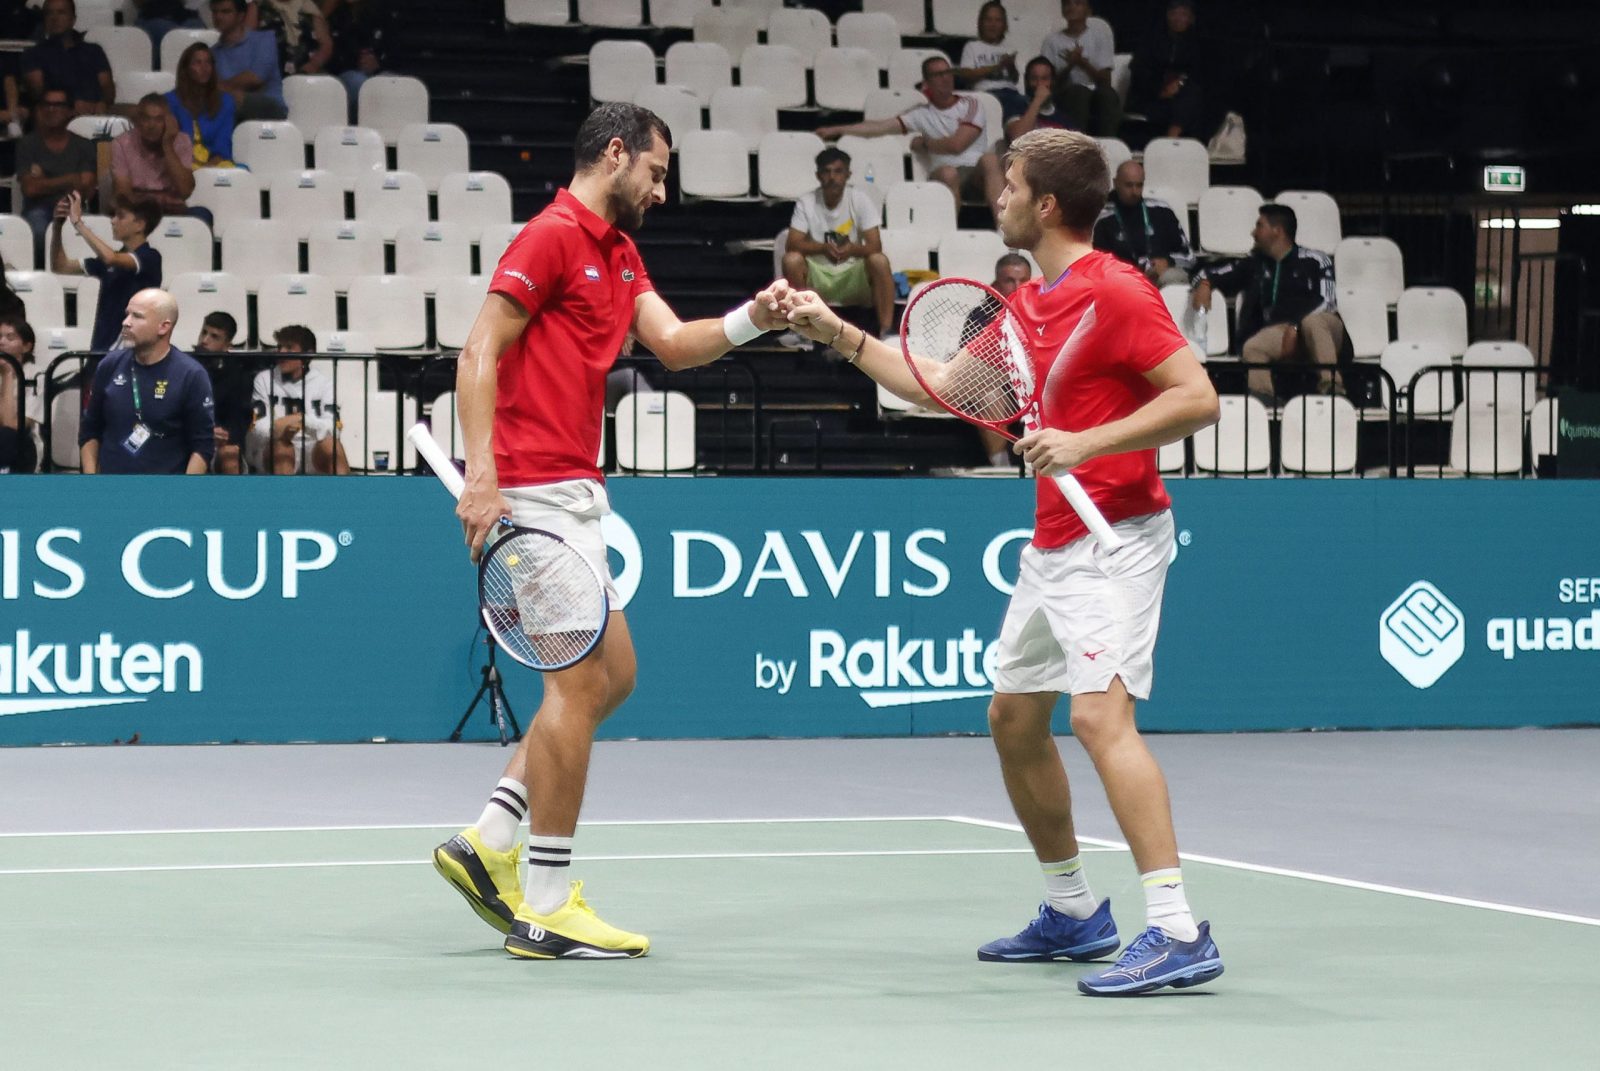 epa10186747 Croatian players Nikola Mektic (L) and Mate Pavic (R) react during their doubles match  against Swedish players Mikael Ymer and Elias Ymer at the Davis Cup Finals group A tie between Croatia and Sweden in Casalecchio, near Bologna, Italy, 15 September 2022.  EPA/ELISABETTA BARACCHI